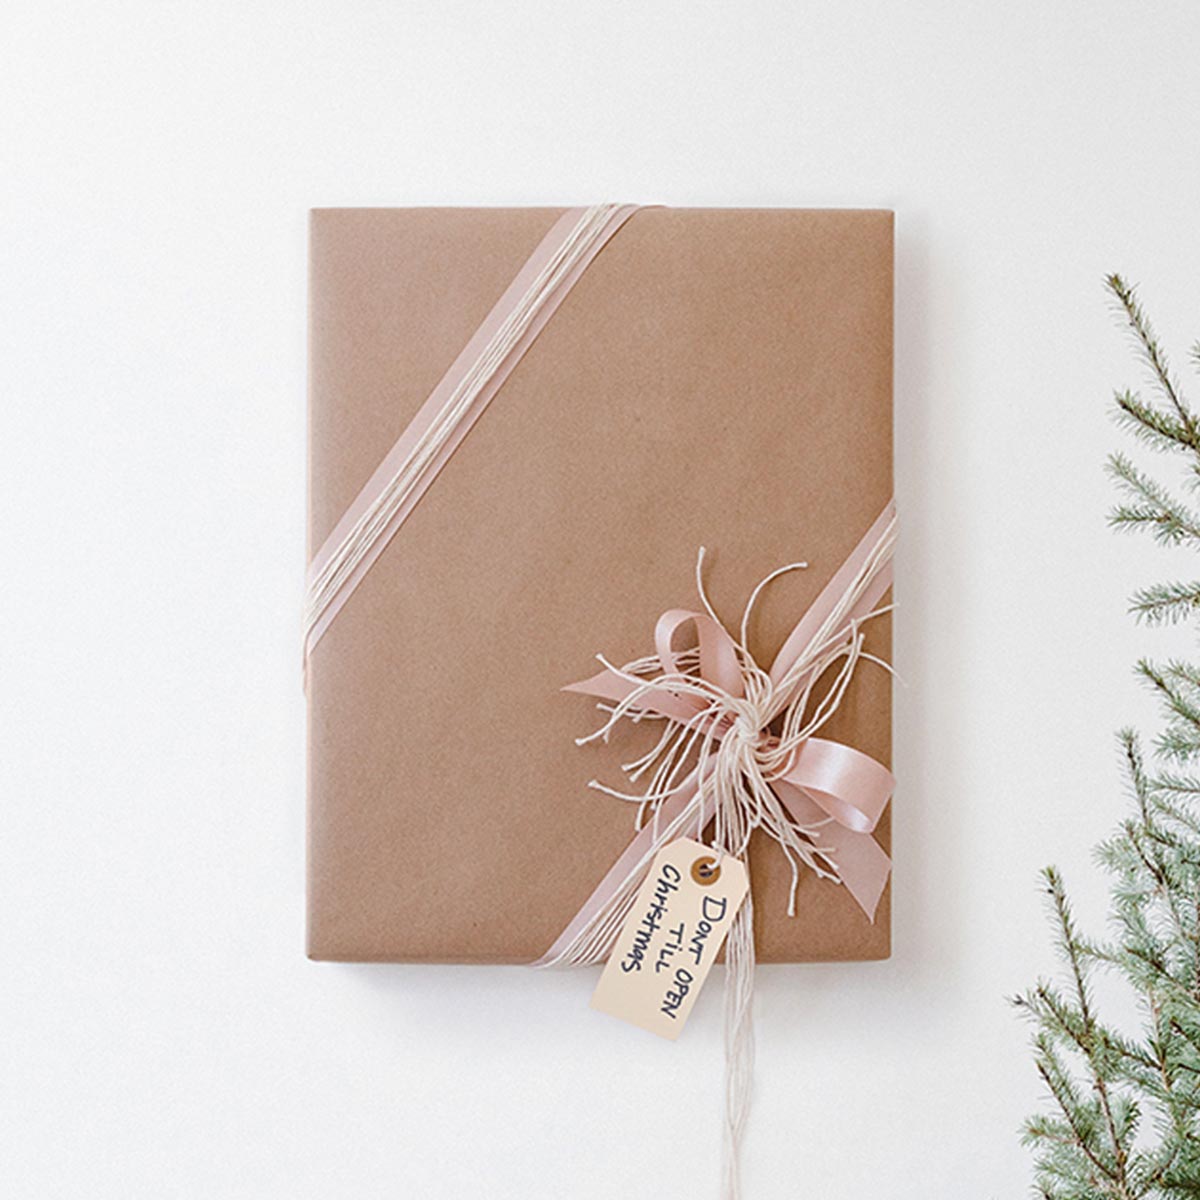 Wrapped frame hanging on wall with gift tag